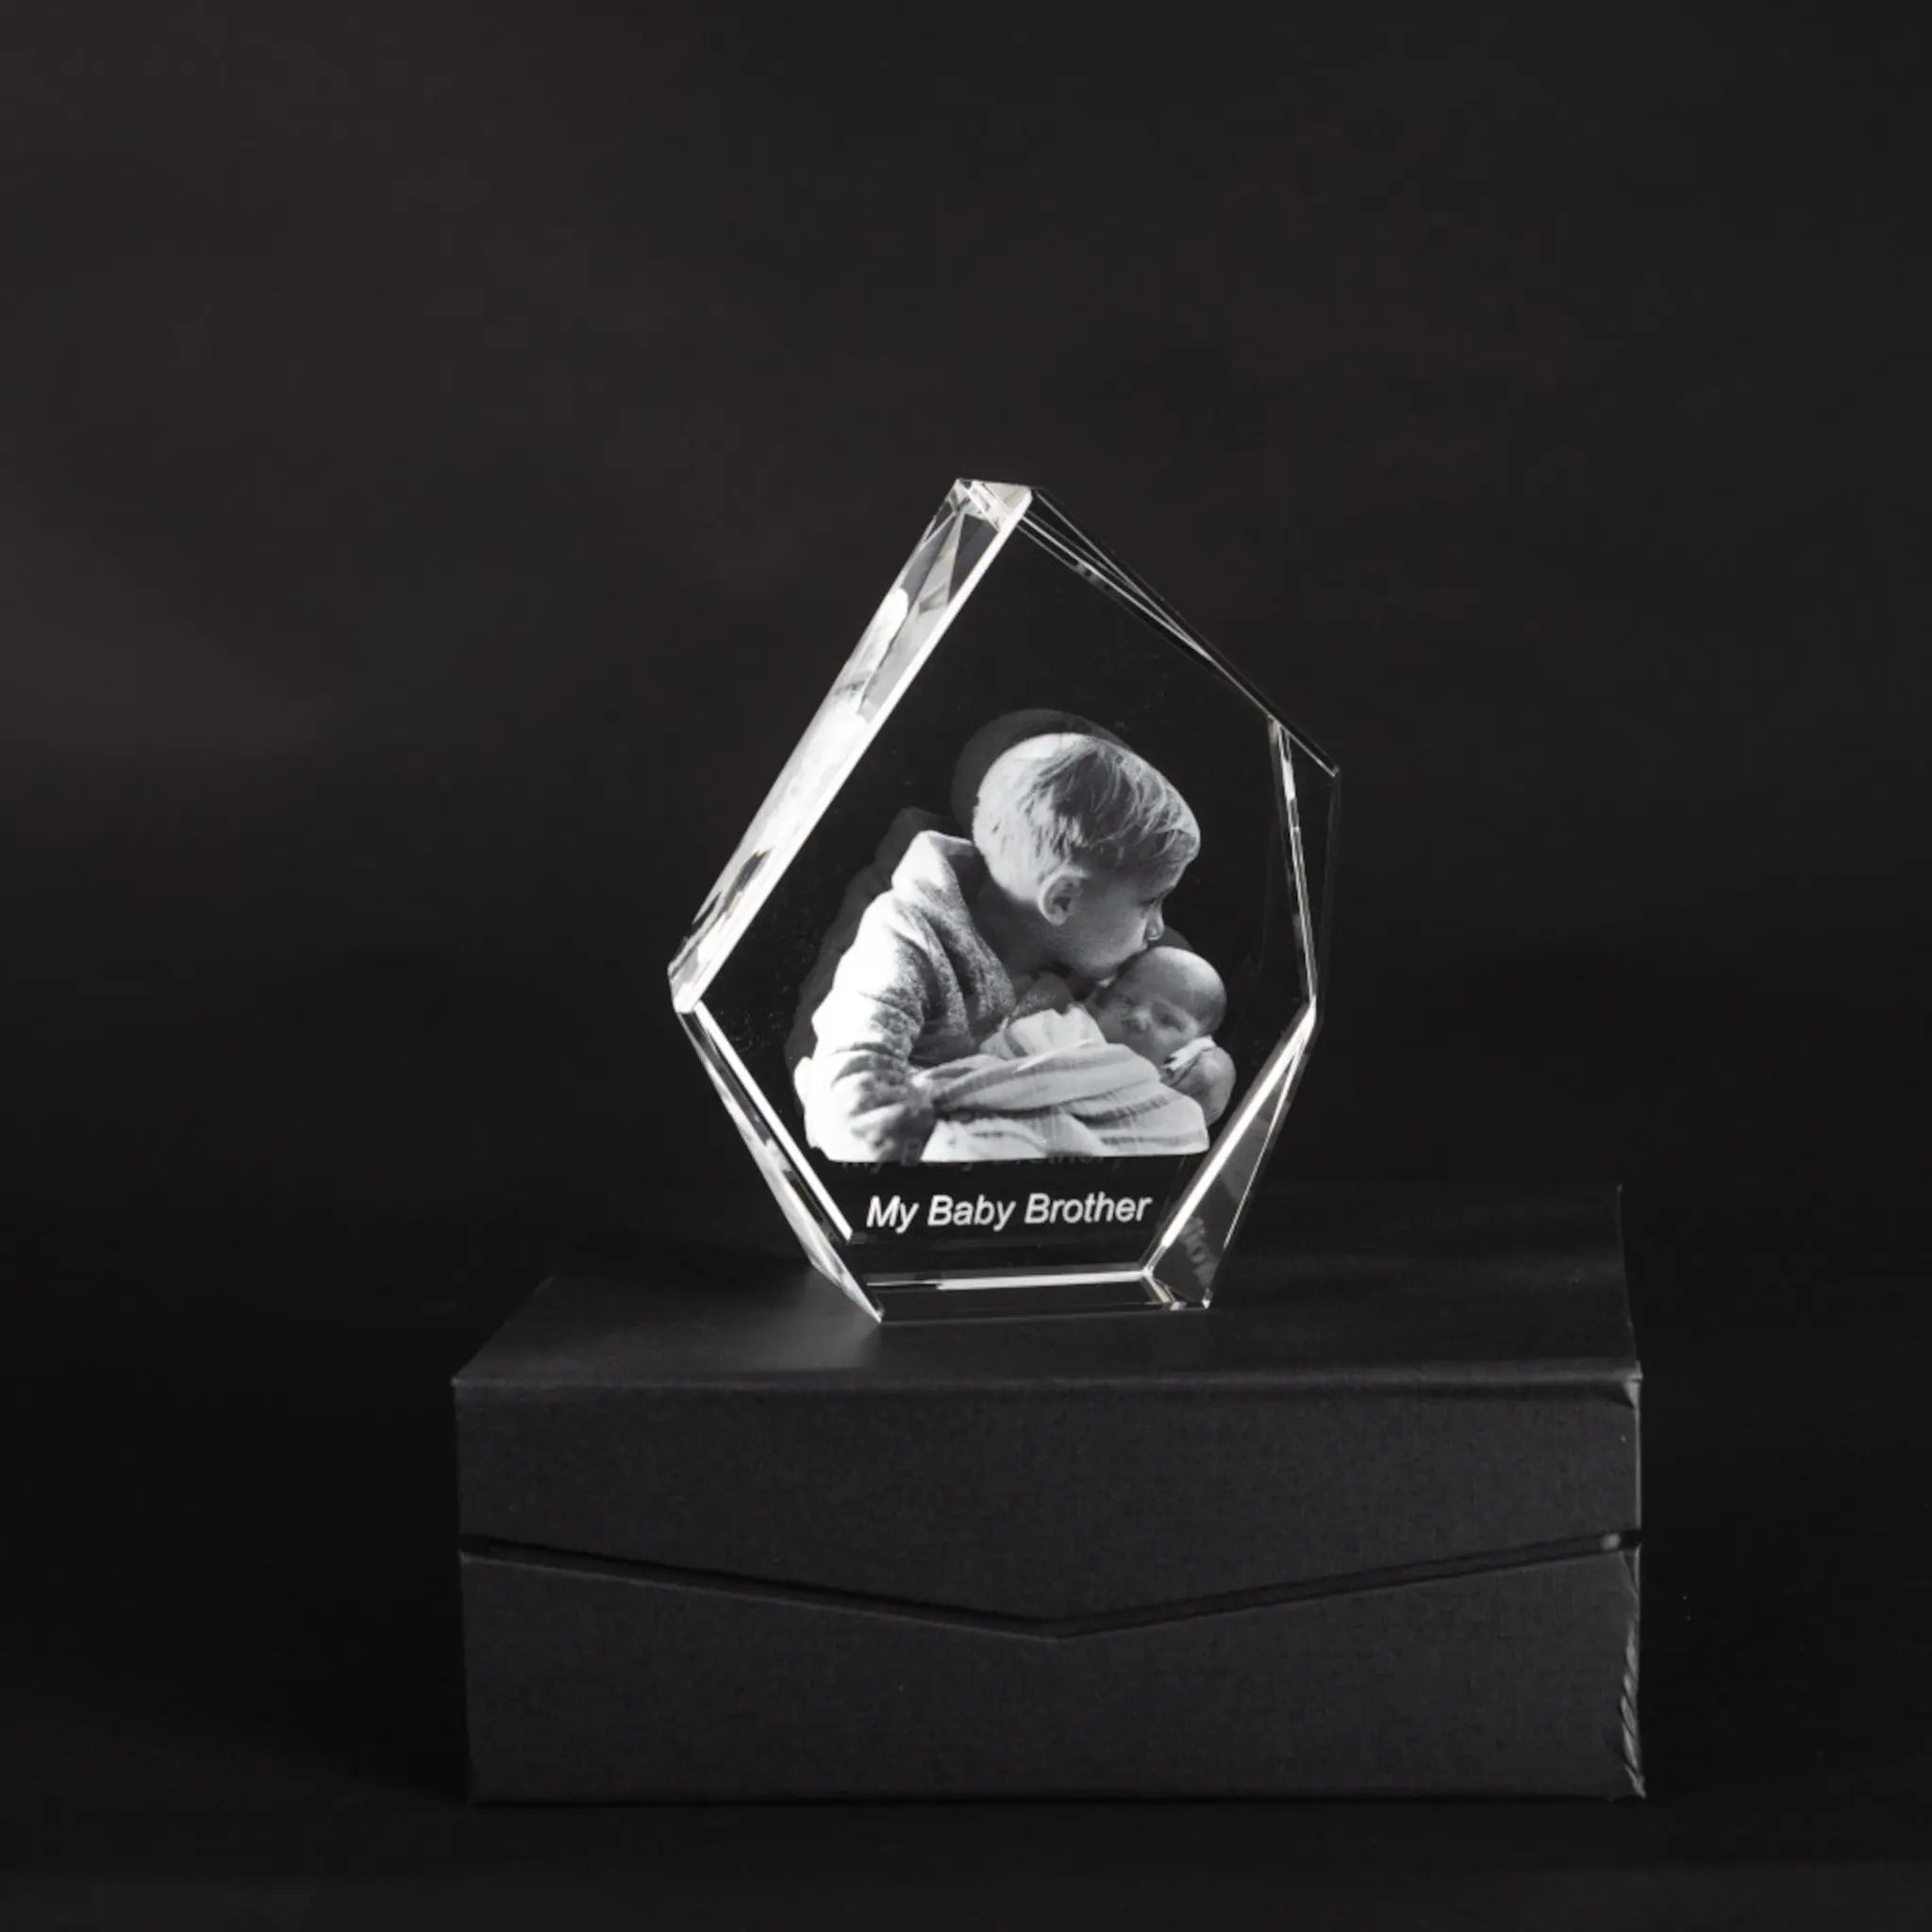 Get a Stunning 3D Photo Crystal. Our Prestige Iceberg shape Crystal encapsulates the beauty of your special moment. A perfect way to Keep a special moment.